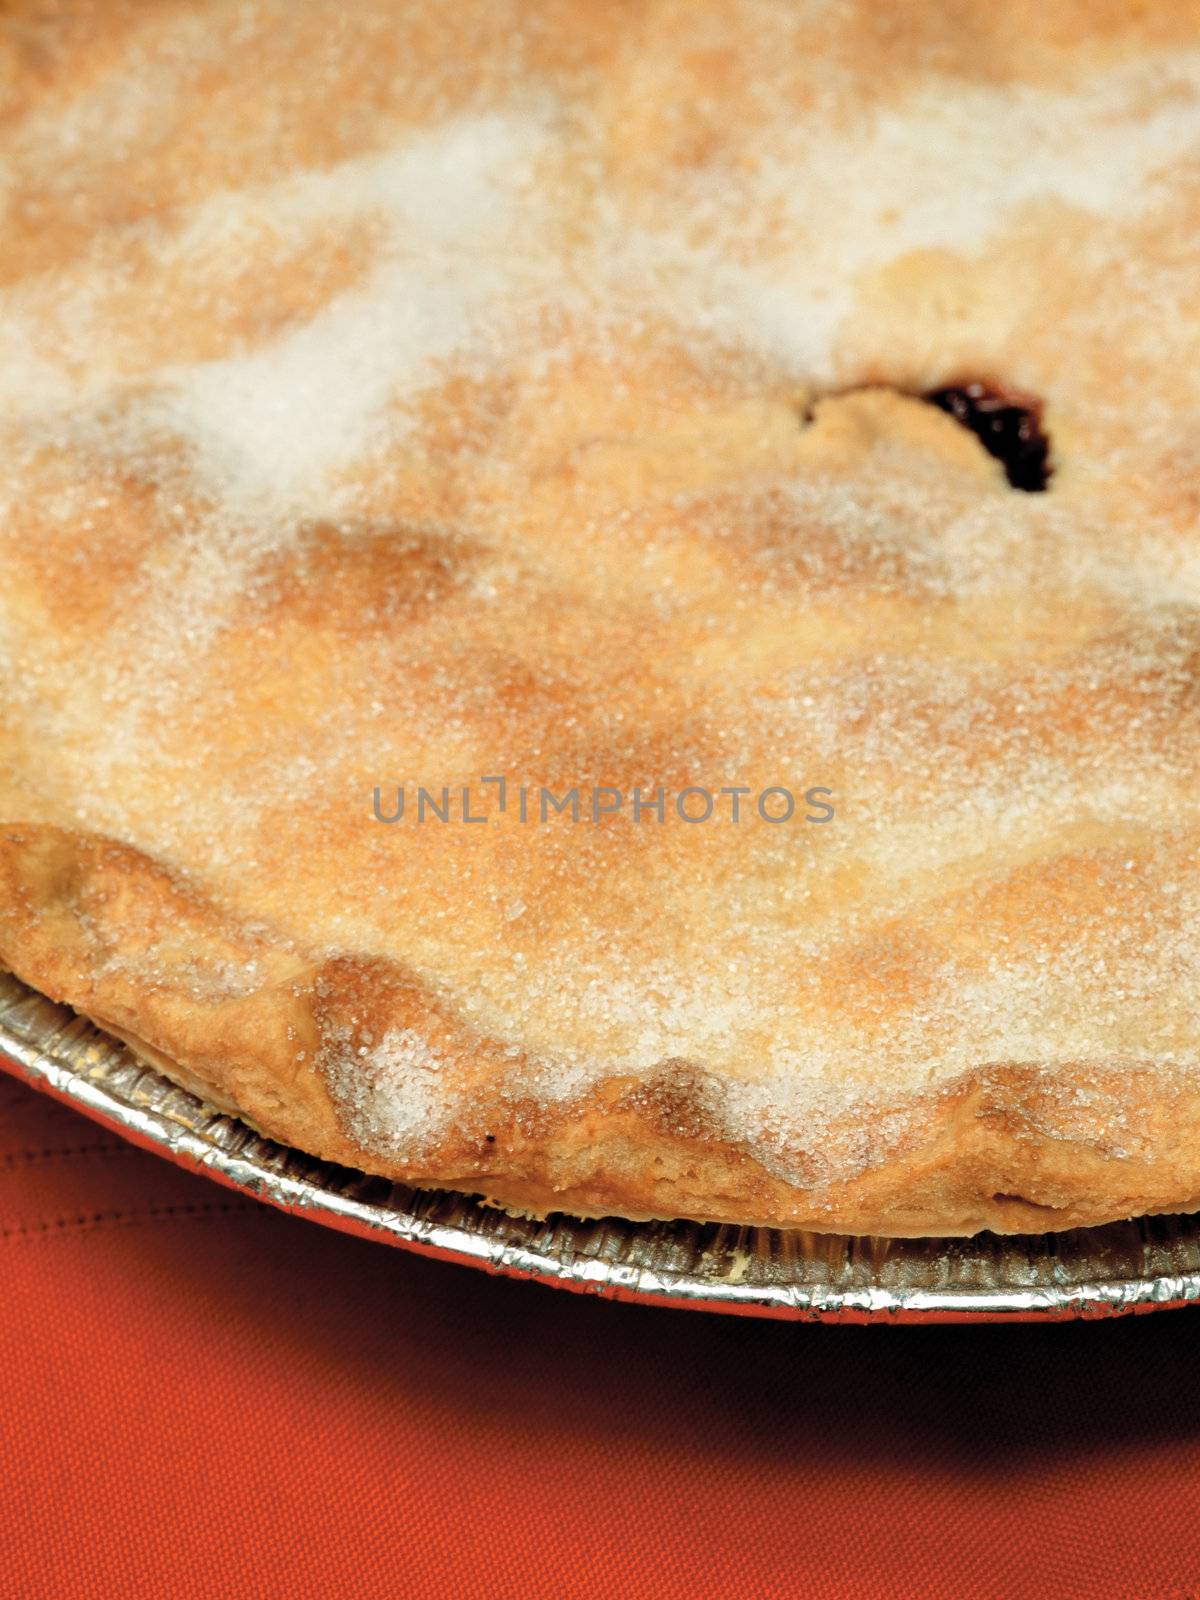 Closeup of hot blueberry, raspberry or even mincemeat pie in tinfoil plate.
